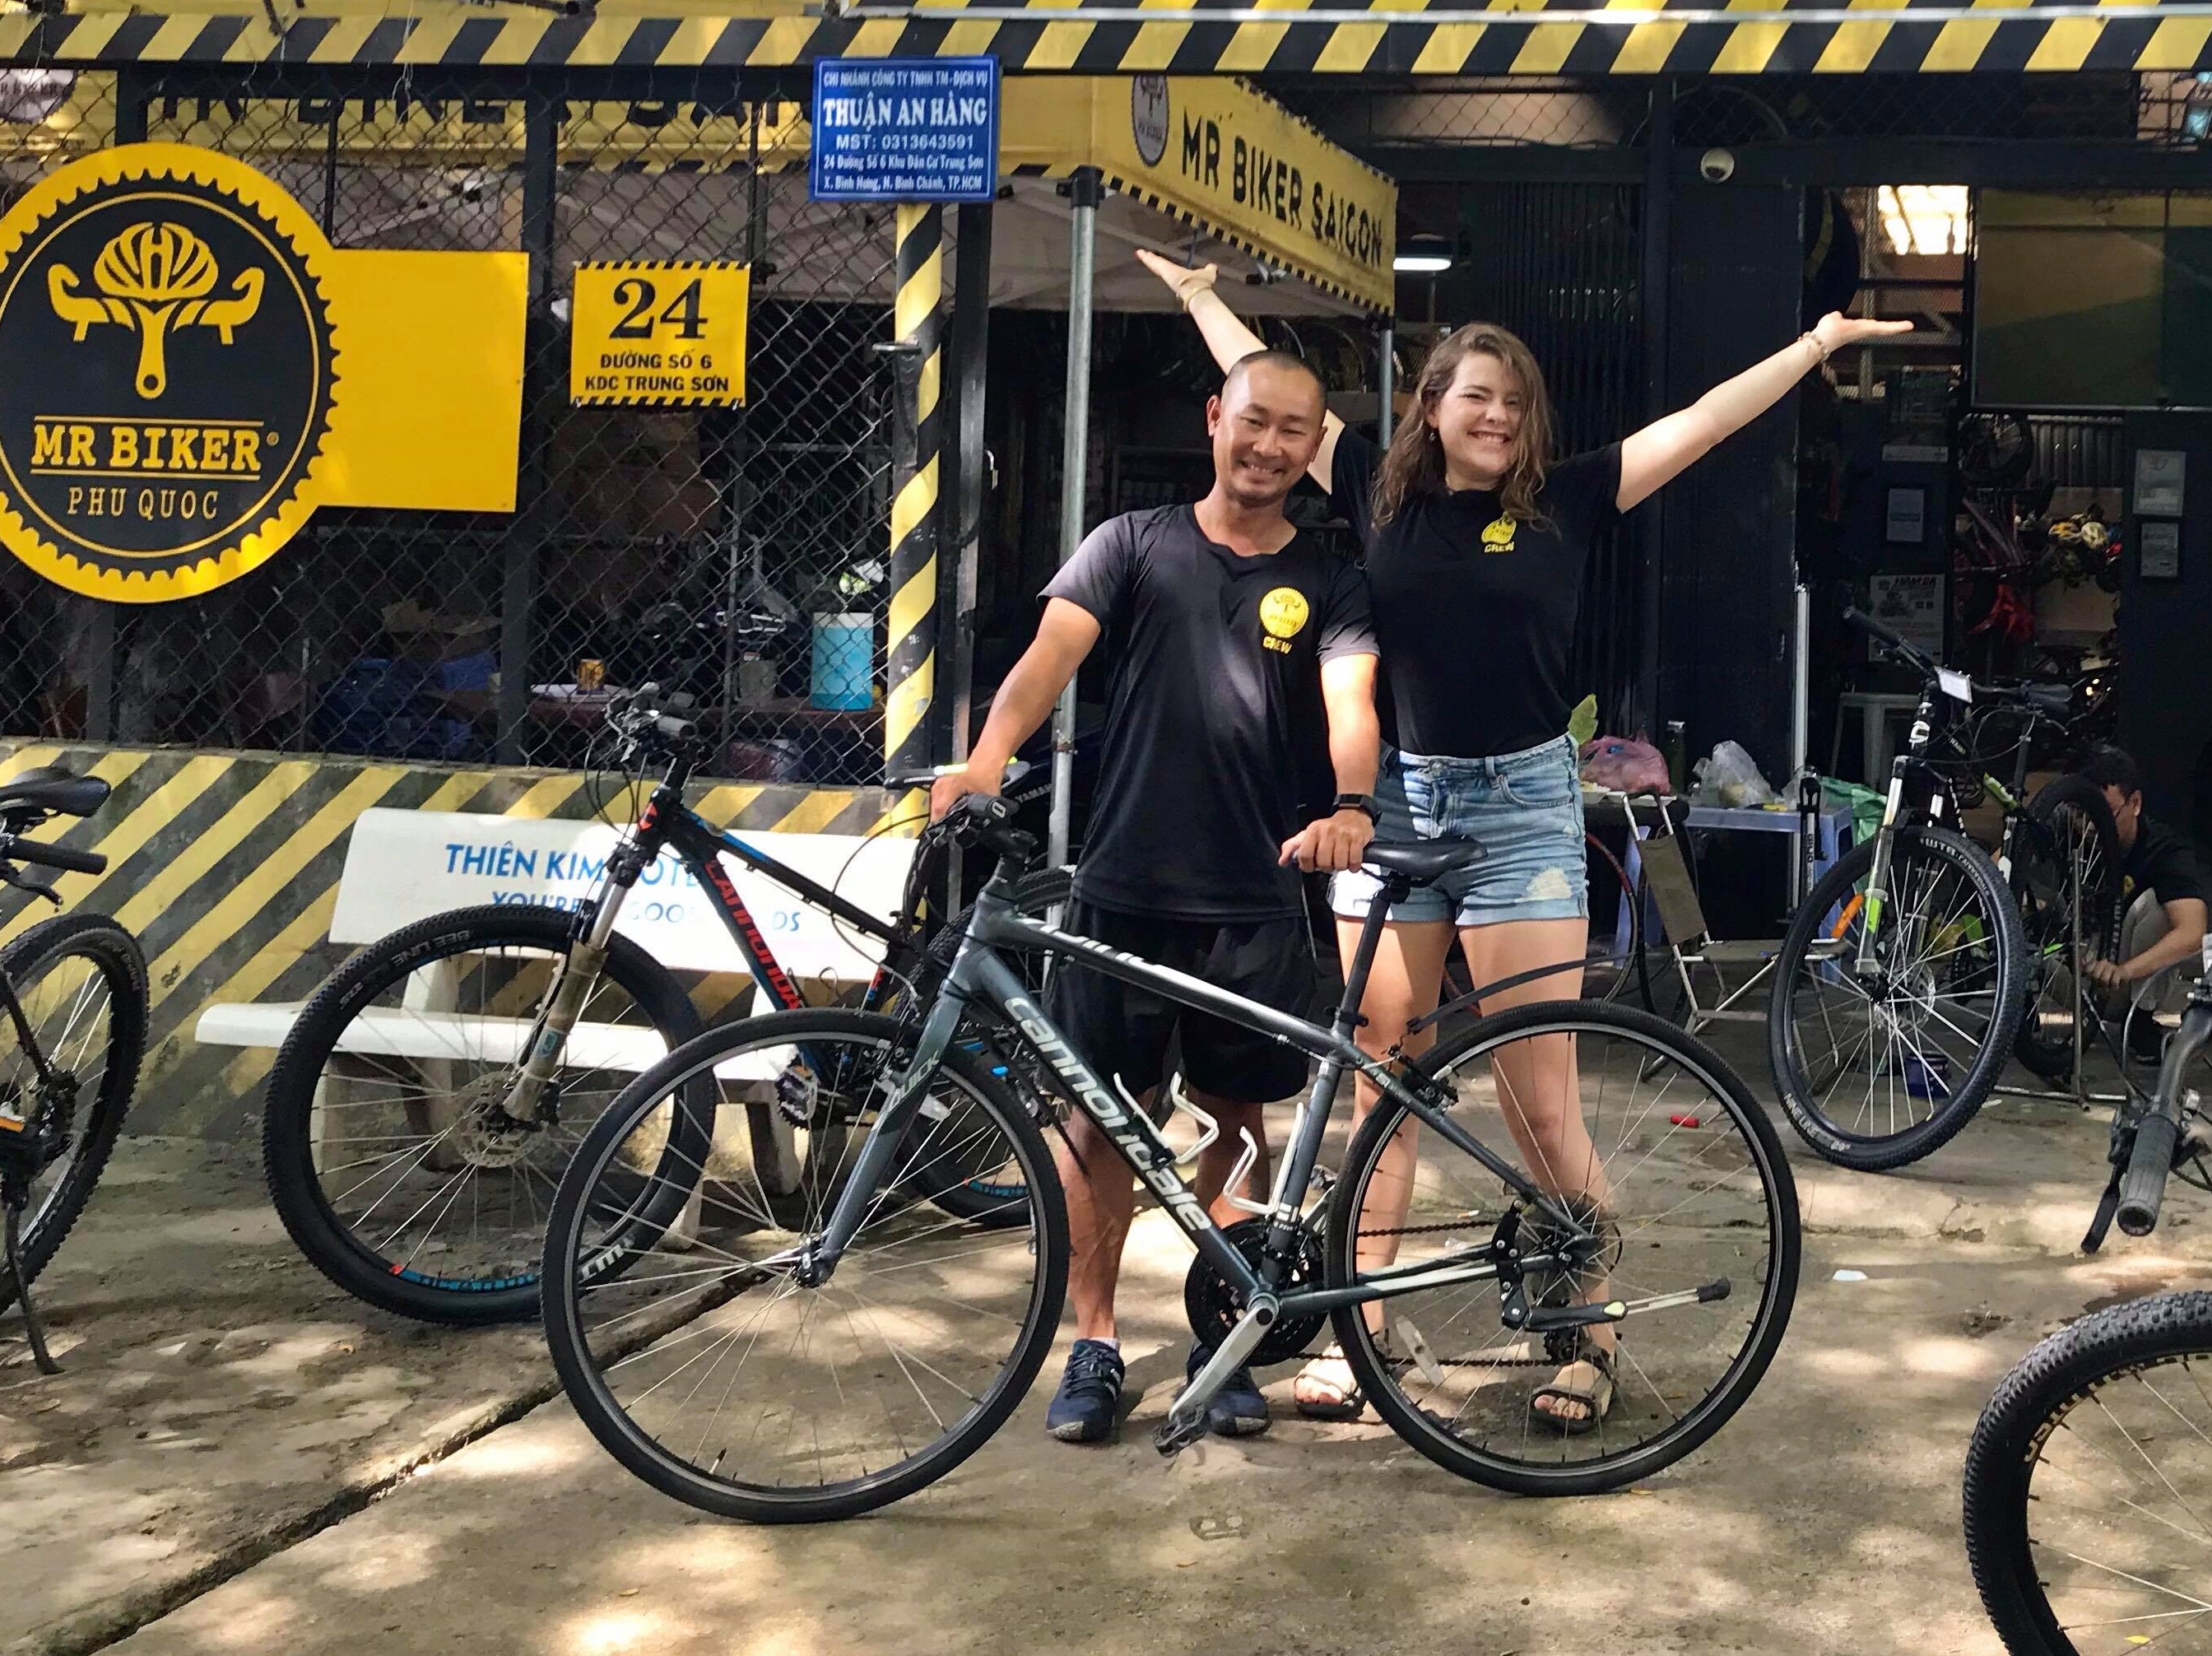 Lithuanian tourist speechless as bike stolen twice in less than 2 yrs in Ho Chi Minh City